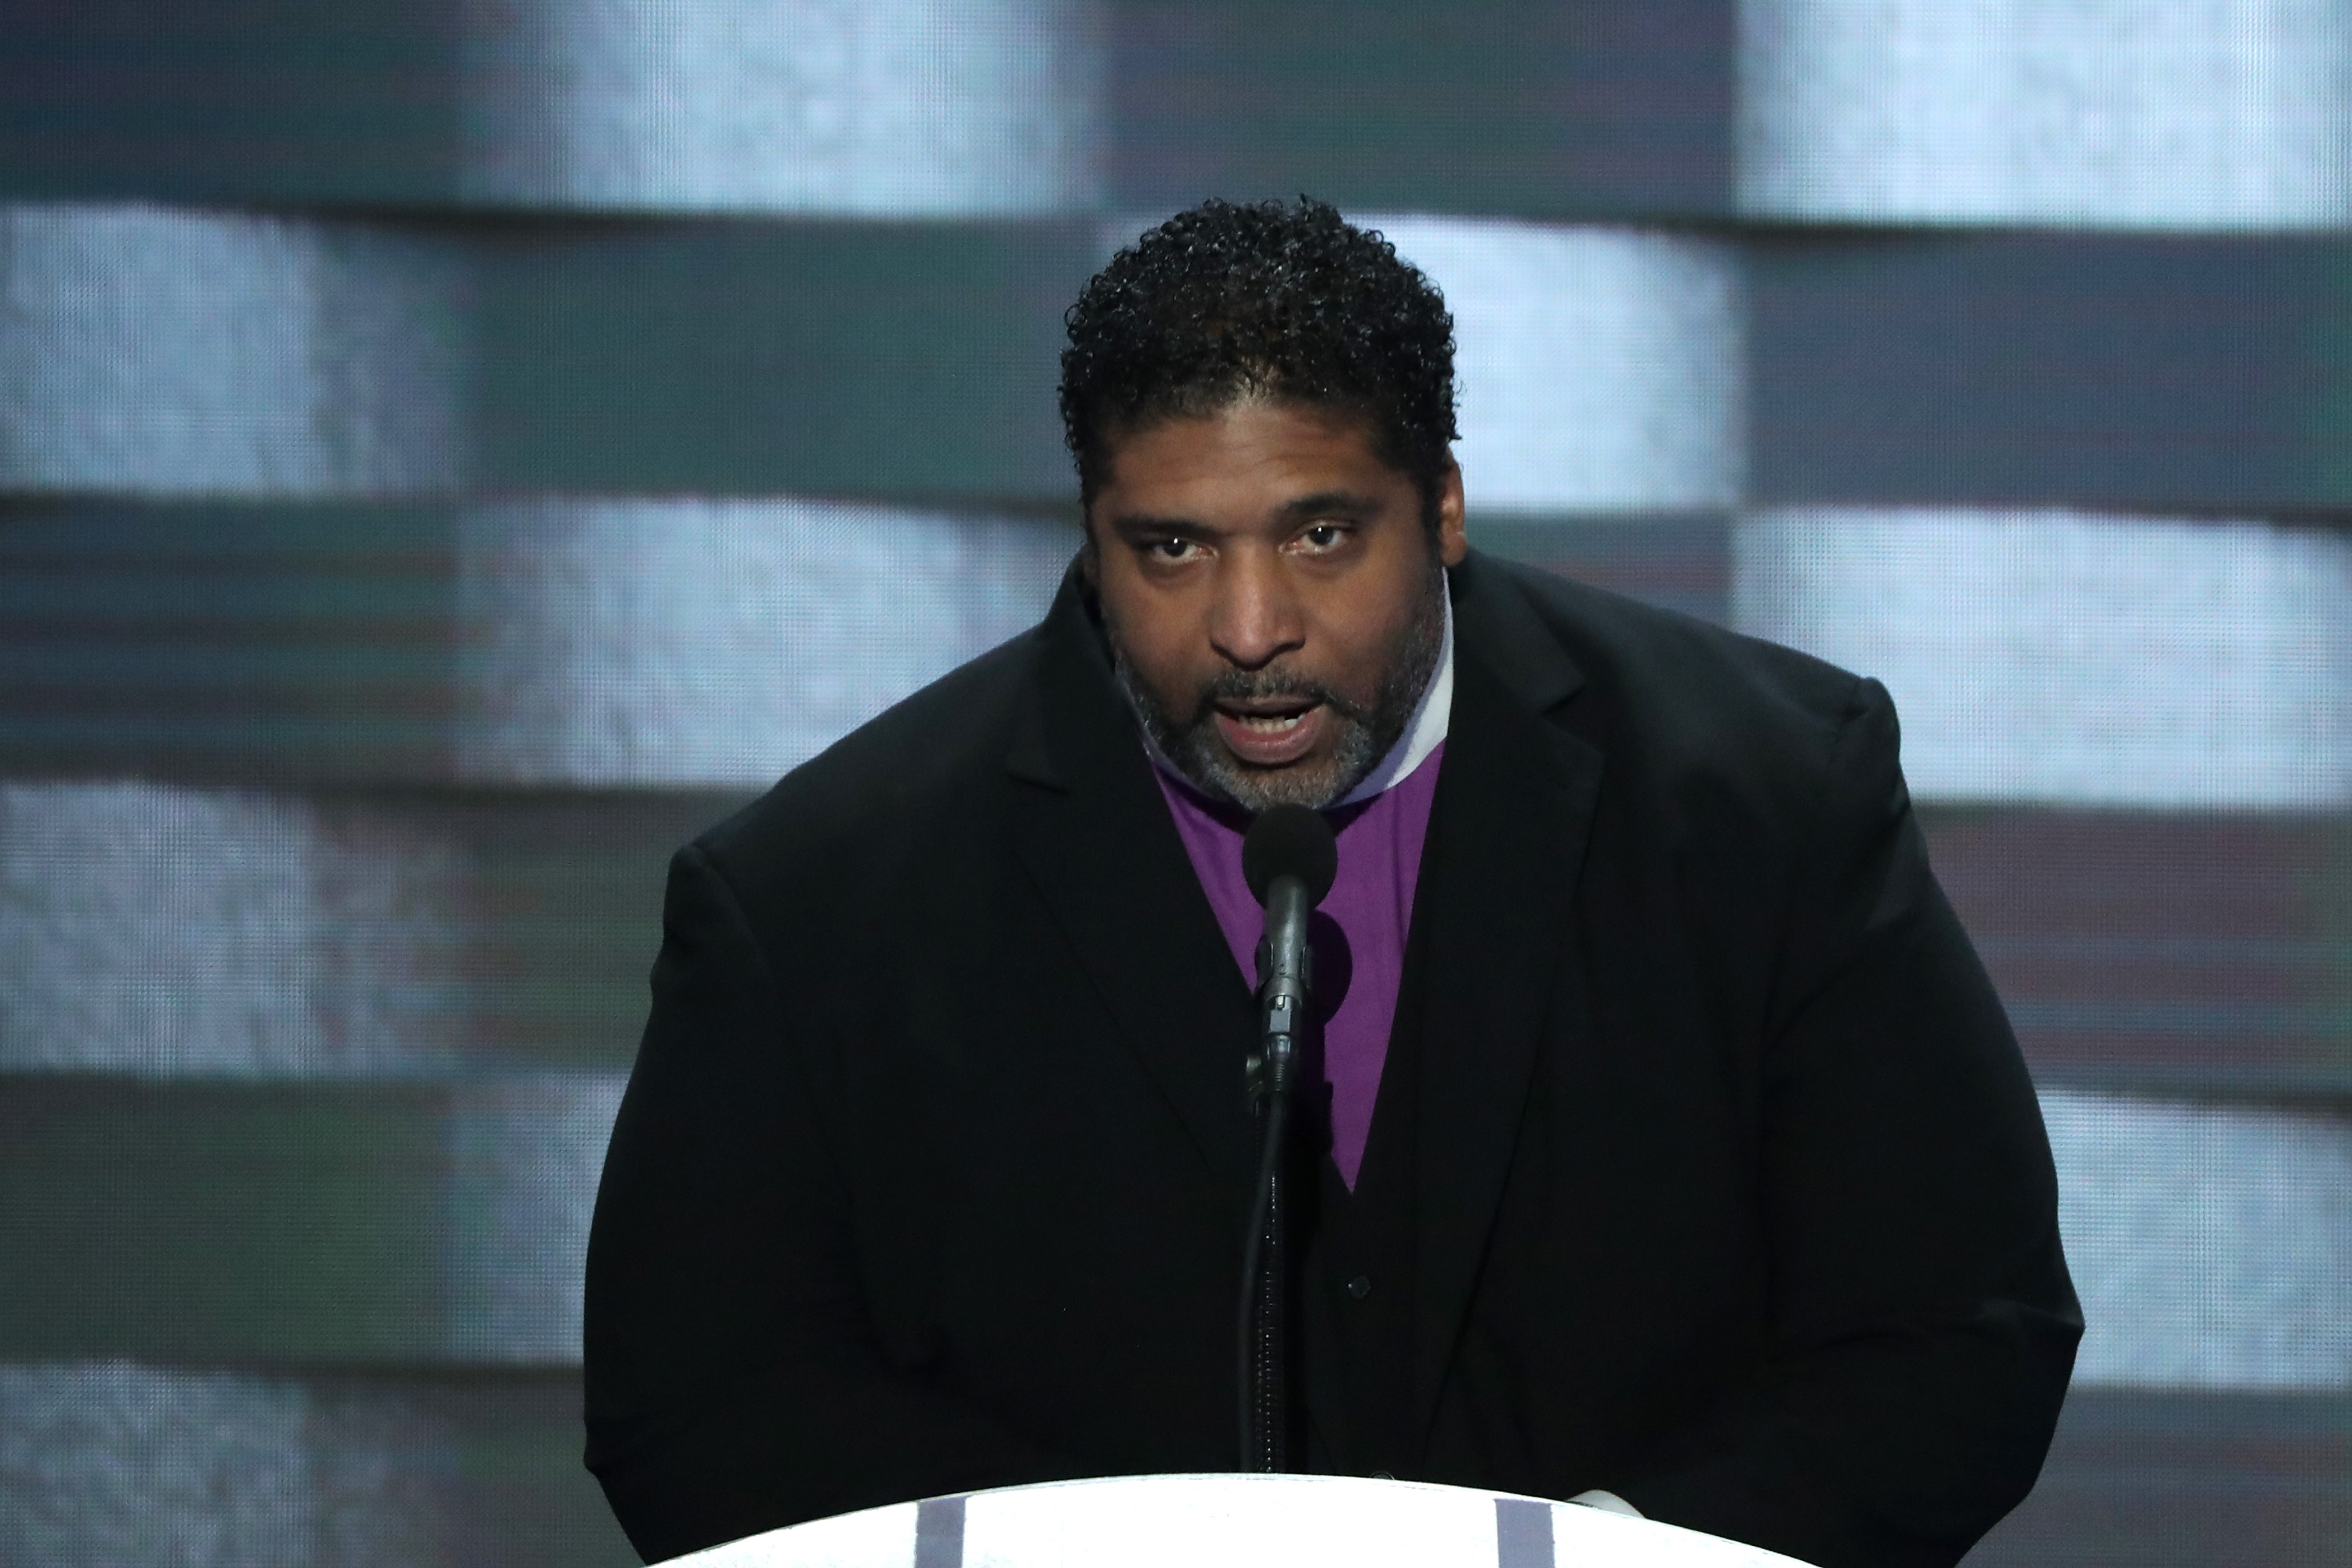 Reverend William Barber delivers remarks on the fourth day of the Democratic National Convention at the Wells Fargo Center in Philadelphia on July 28, 2016. (Alex Wong—Getty Images)